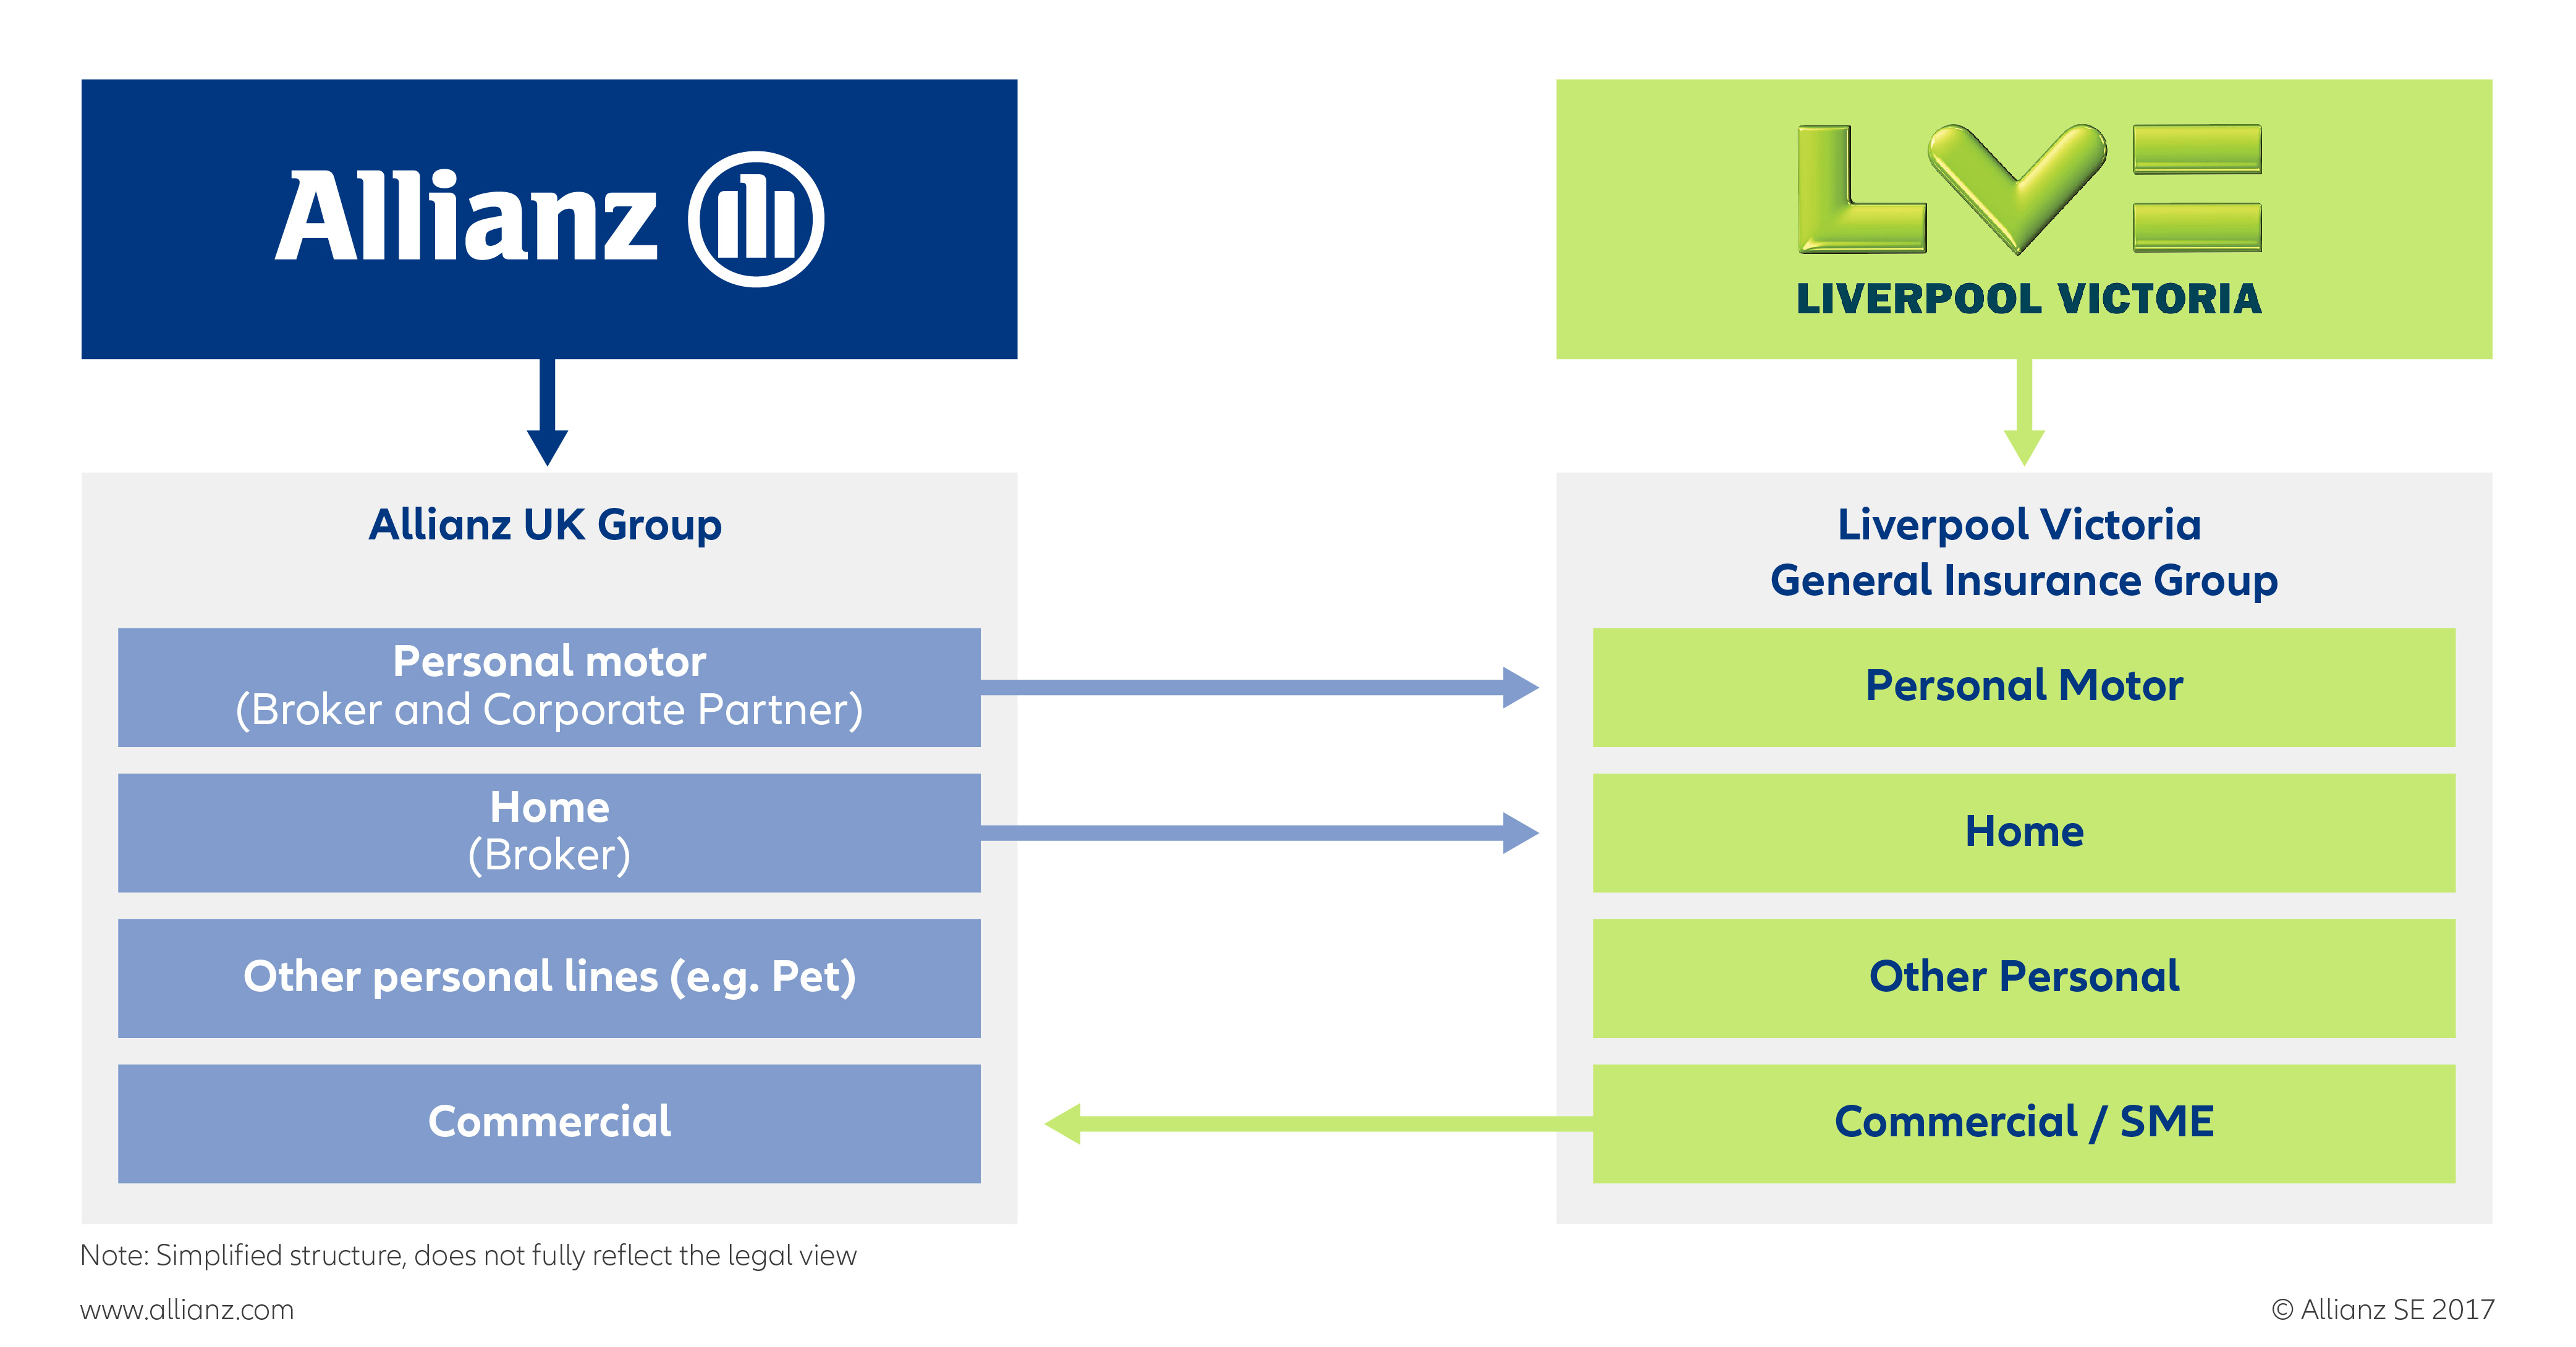 Allianz UK to become sole owner of LV= General Insurance